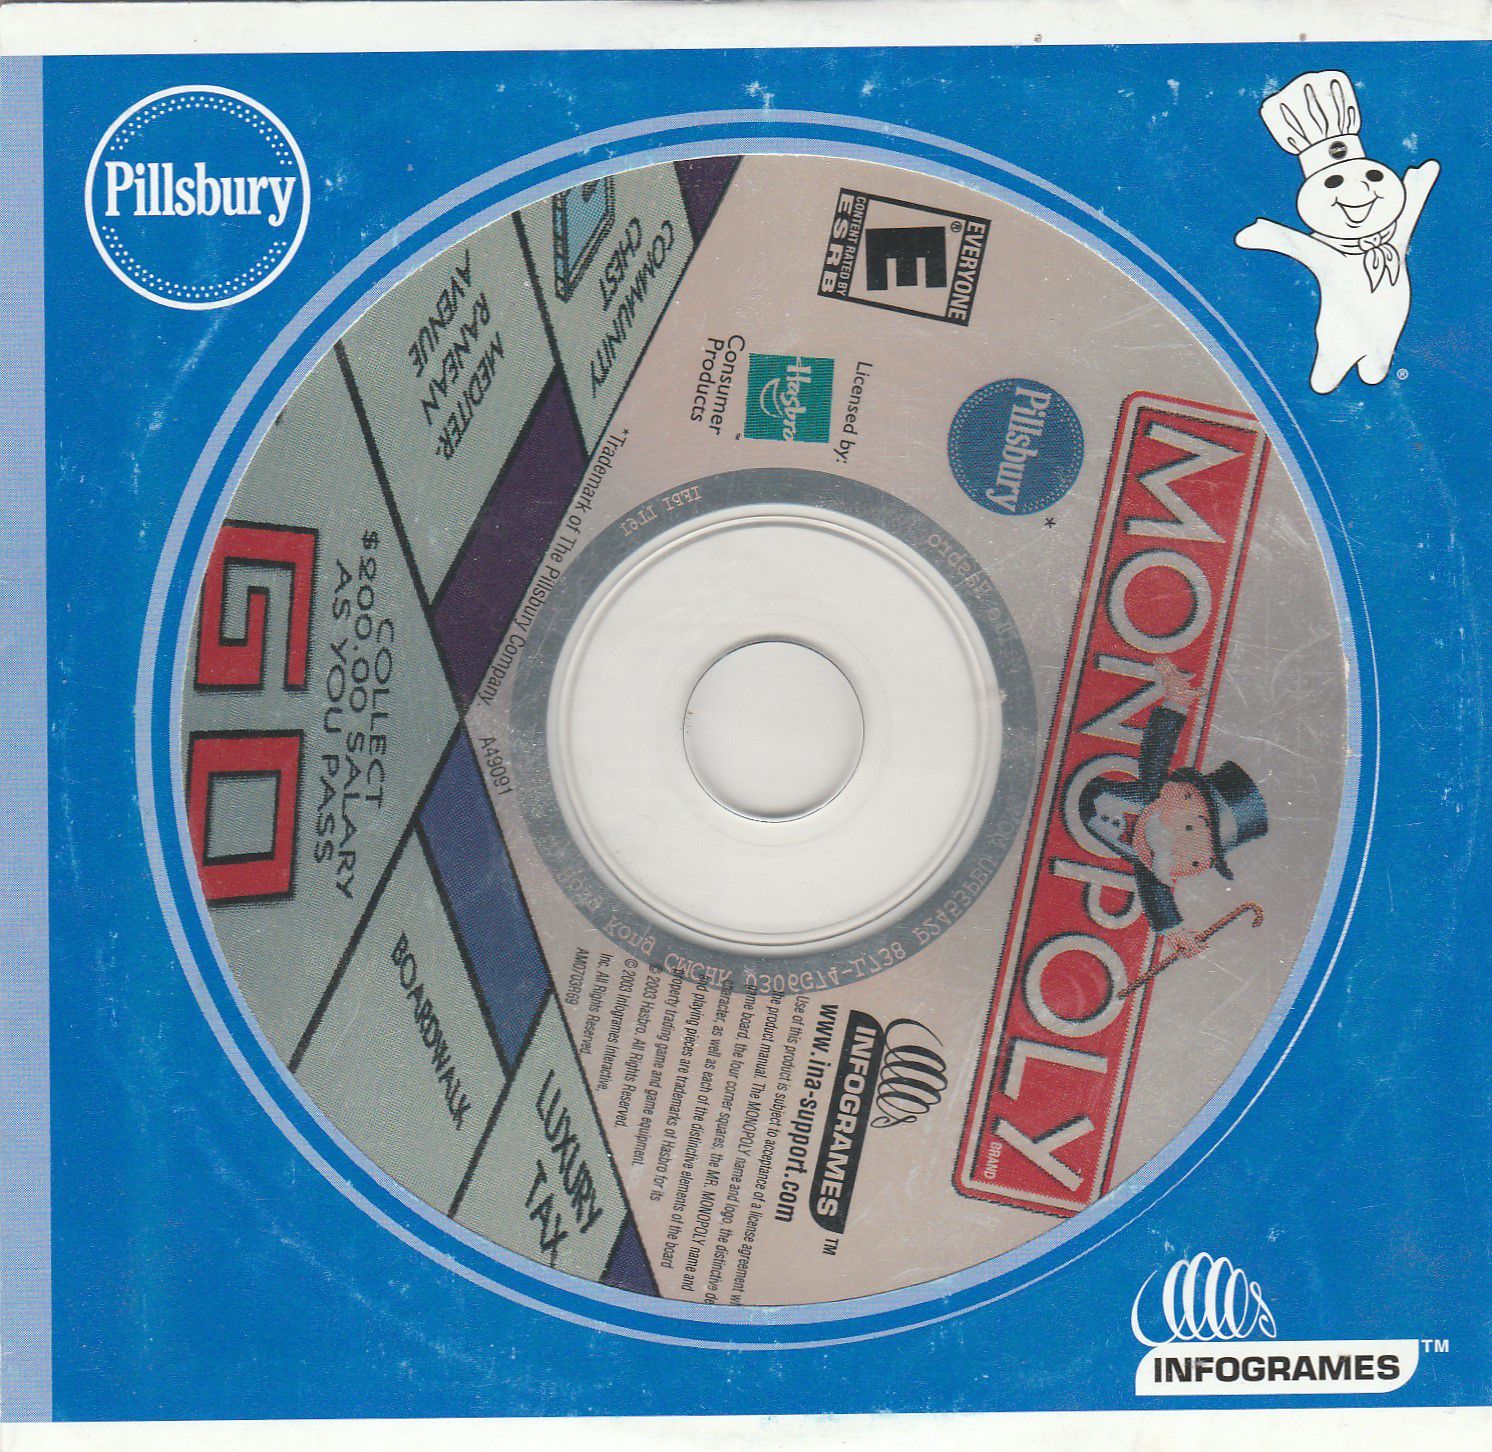 Monopoly CD Game by Pillsbury & InfoGrames for Windows 95 / 98 / ME 2003